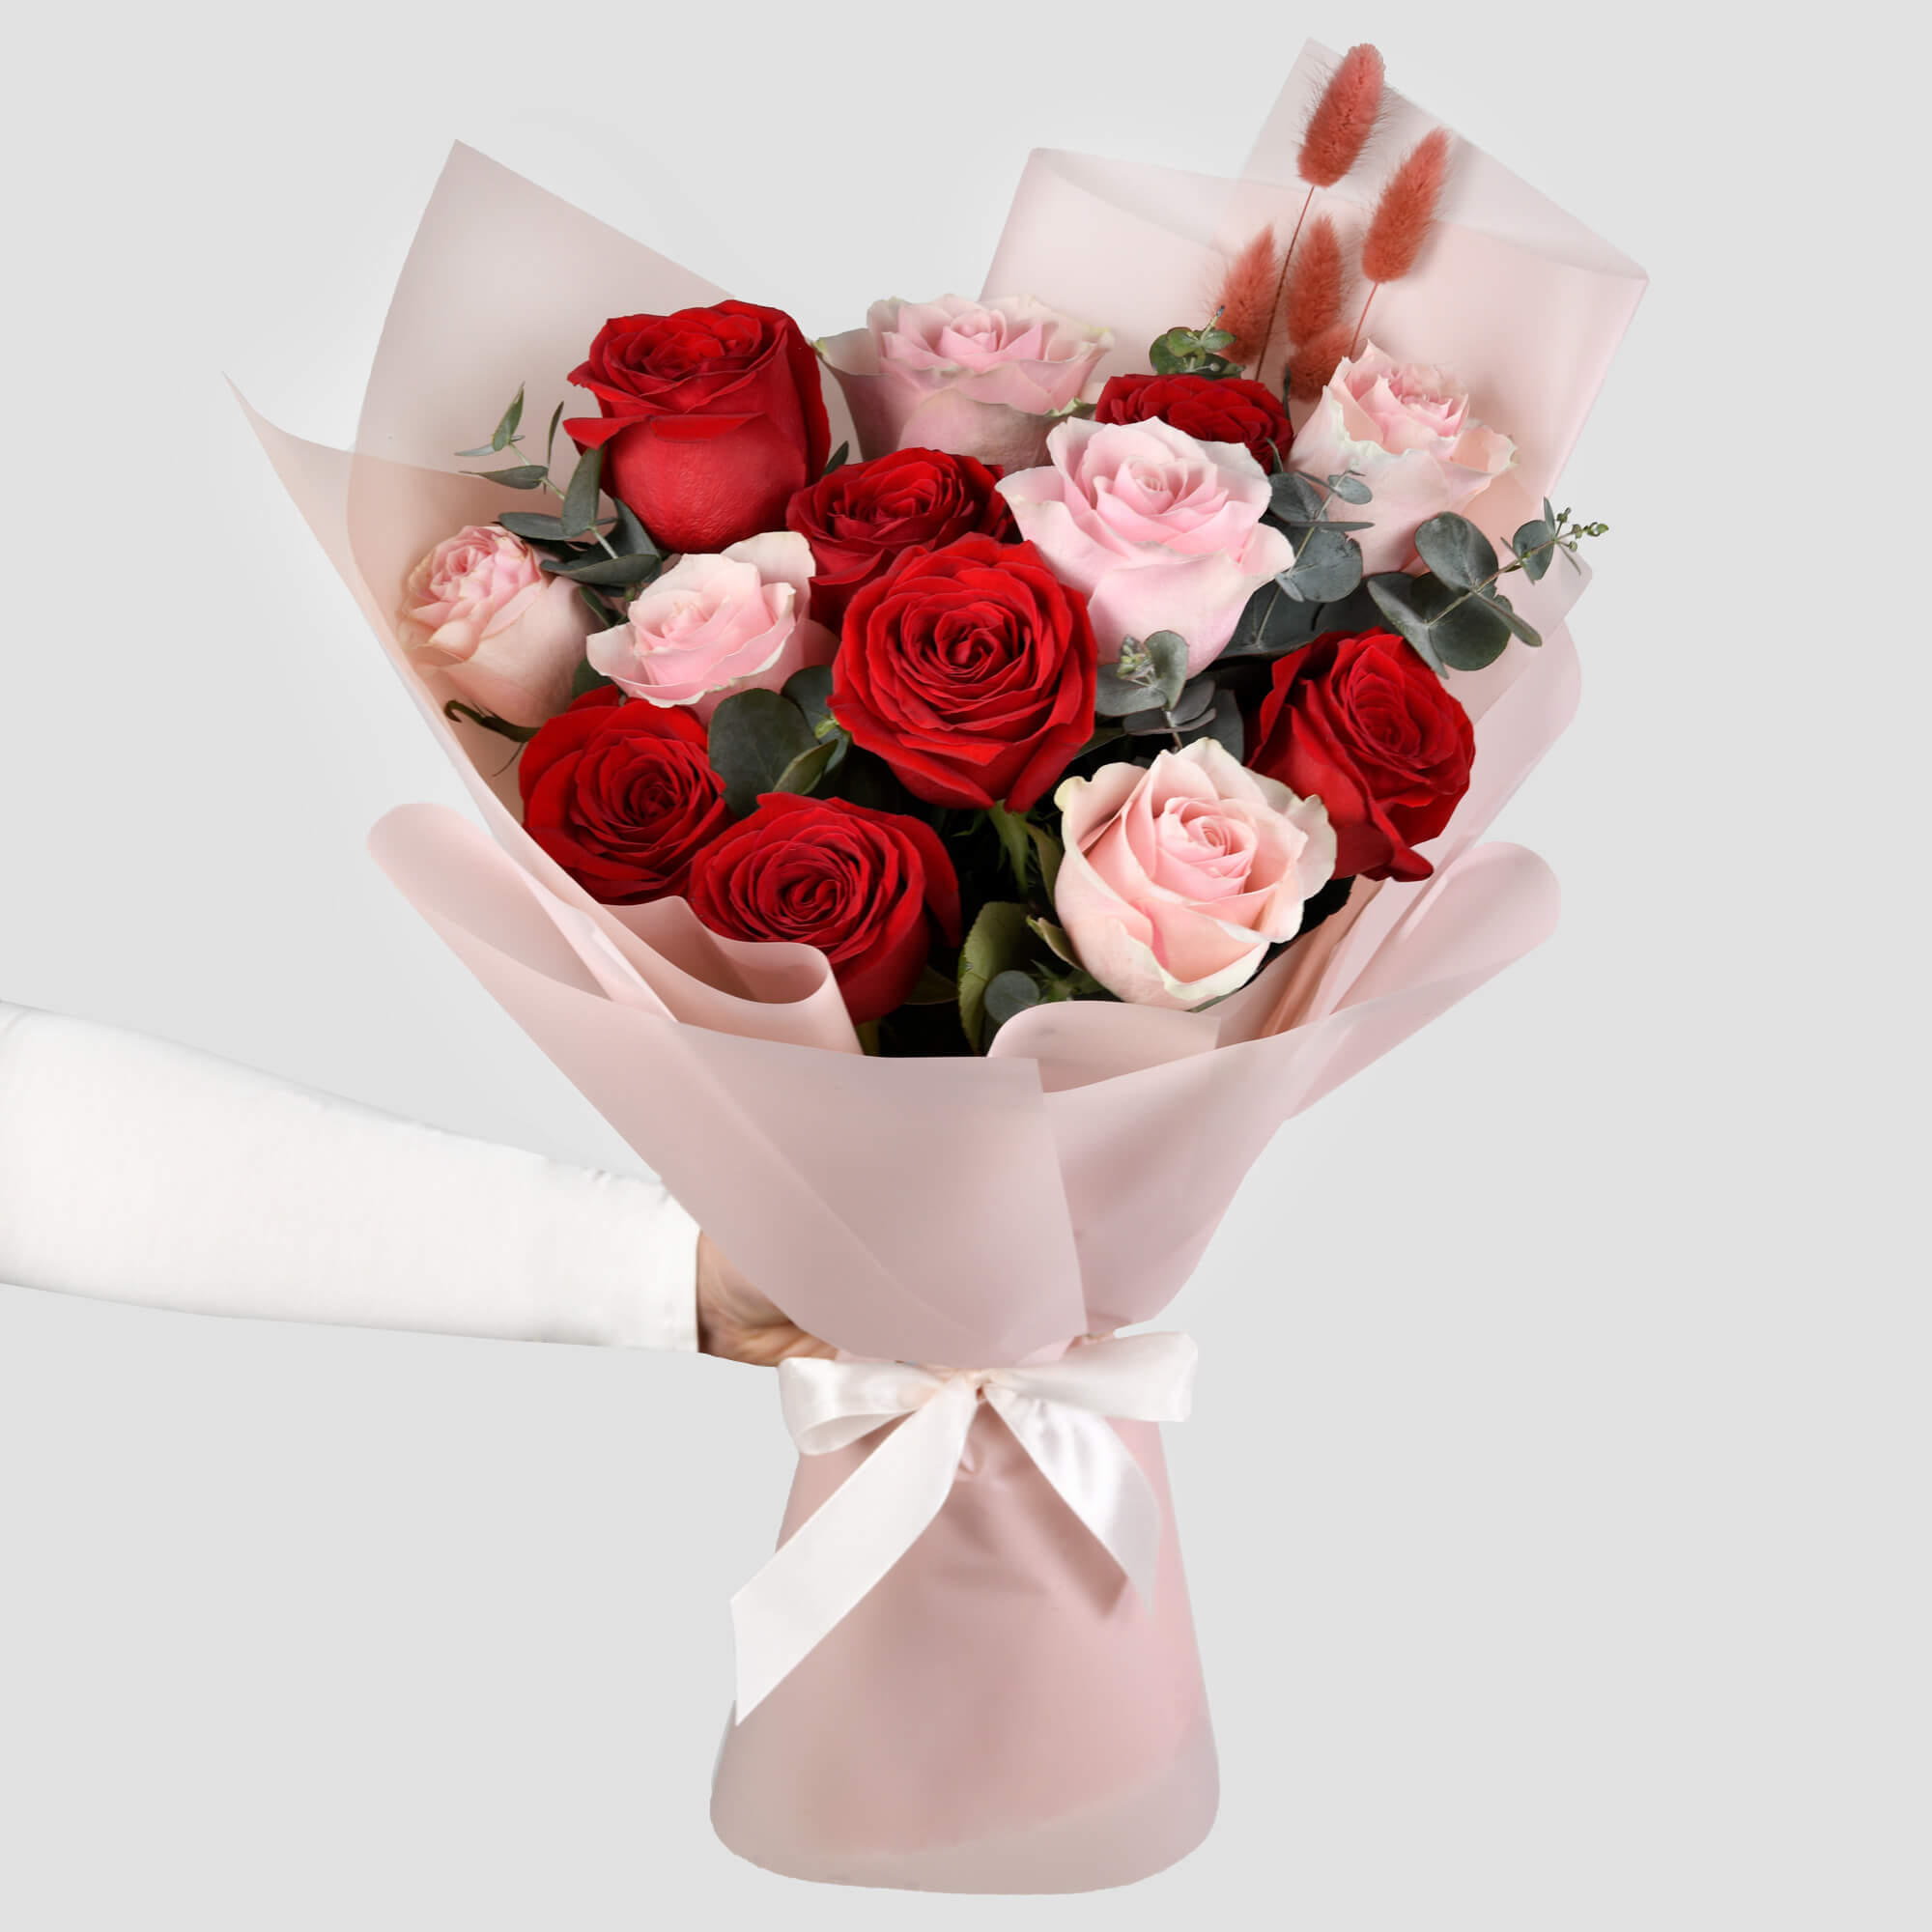 Bouquet of 13 red and pink roses